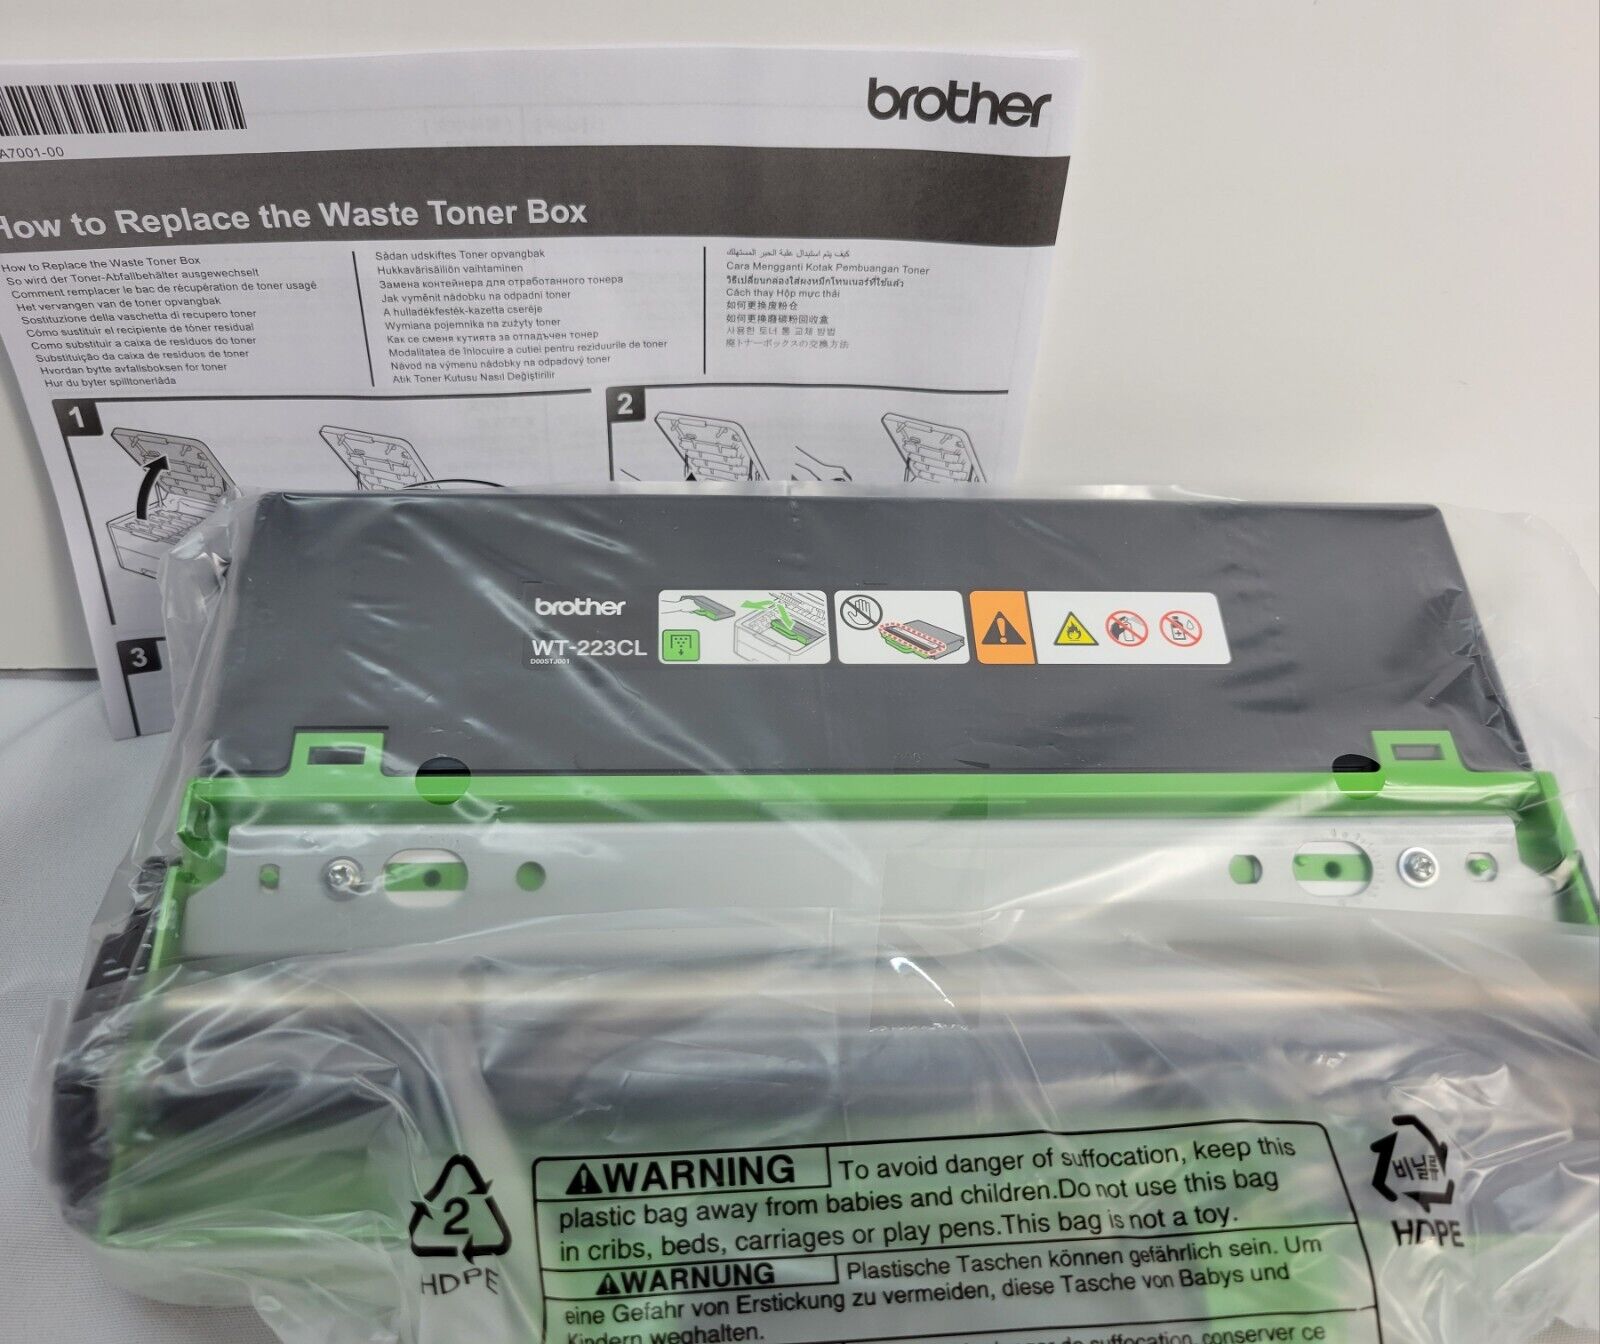 Brother Genuine WT-223CL Waste Toner Box - Seamless, Yields Up To 50,000 Pages